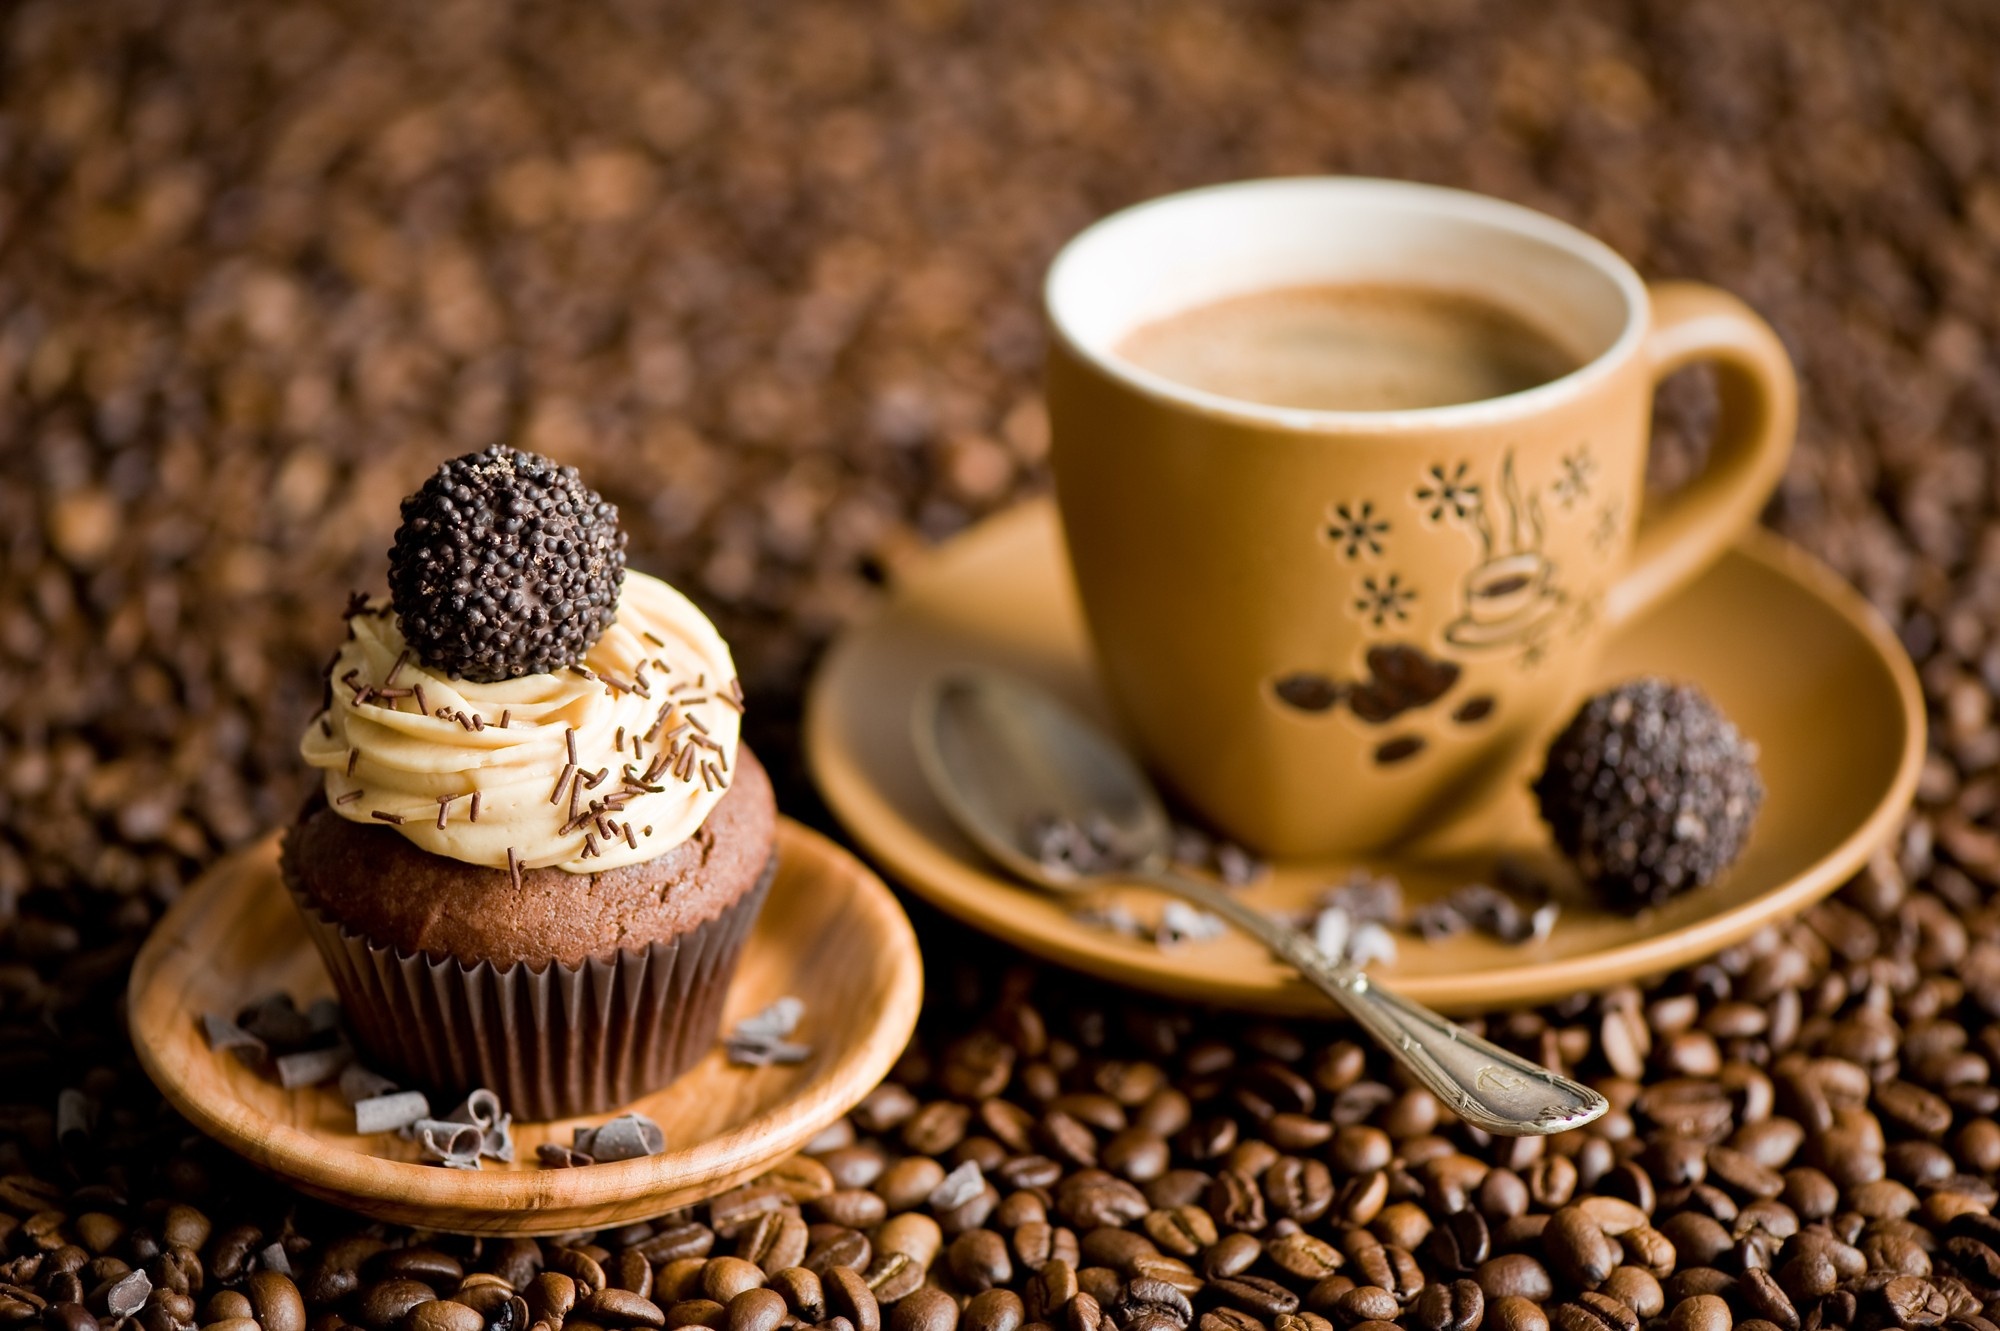 Flavorful coffee drinks, Gourmet coffee beans, Chocolate-infused desserts, Captivating coffee imagery, 2000x1340 HD Desktop